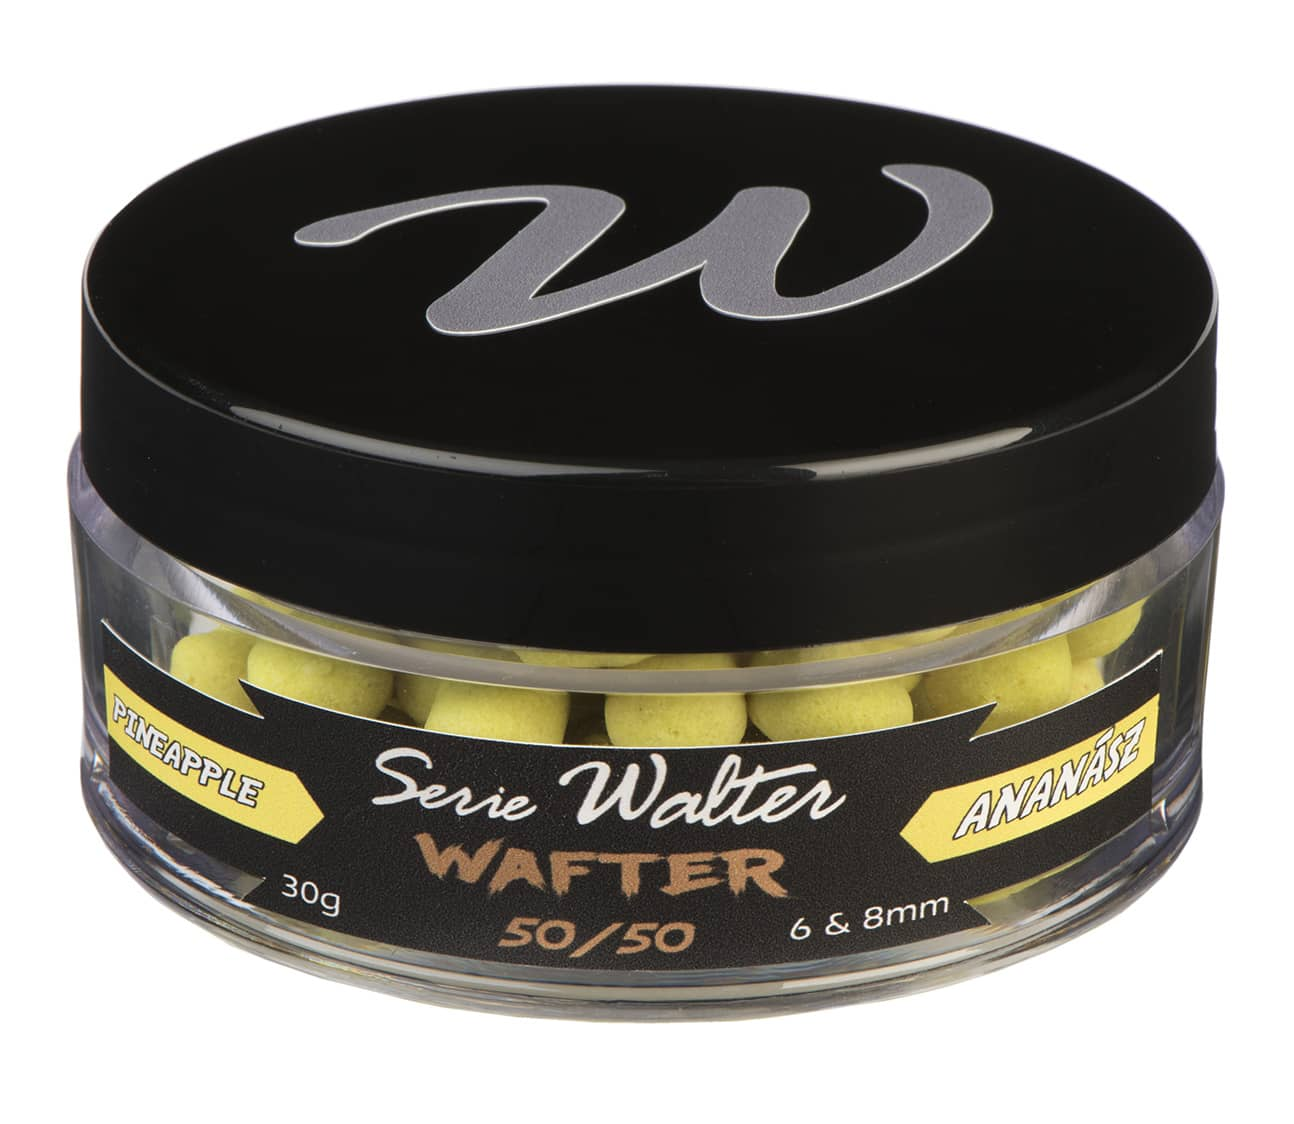 SERIE WALTER WAFTER 6-8MM PINEAPPLE